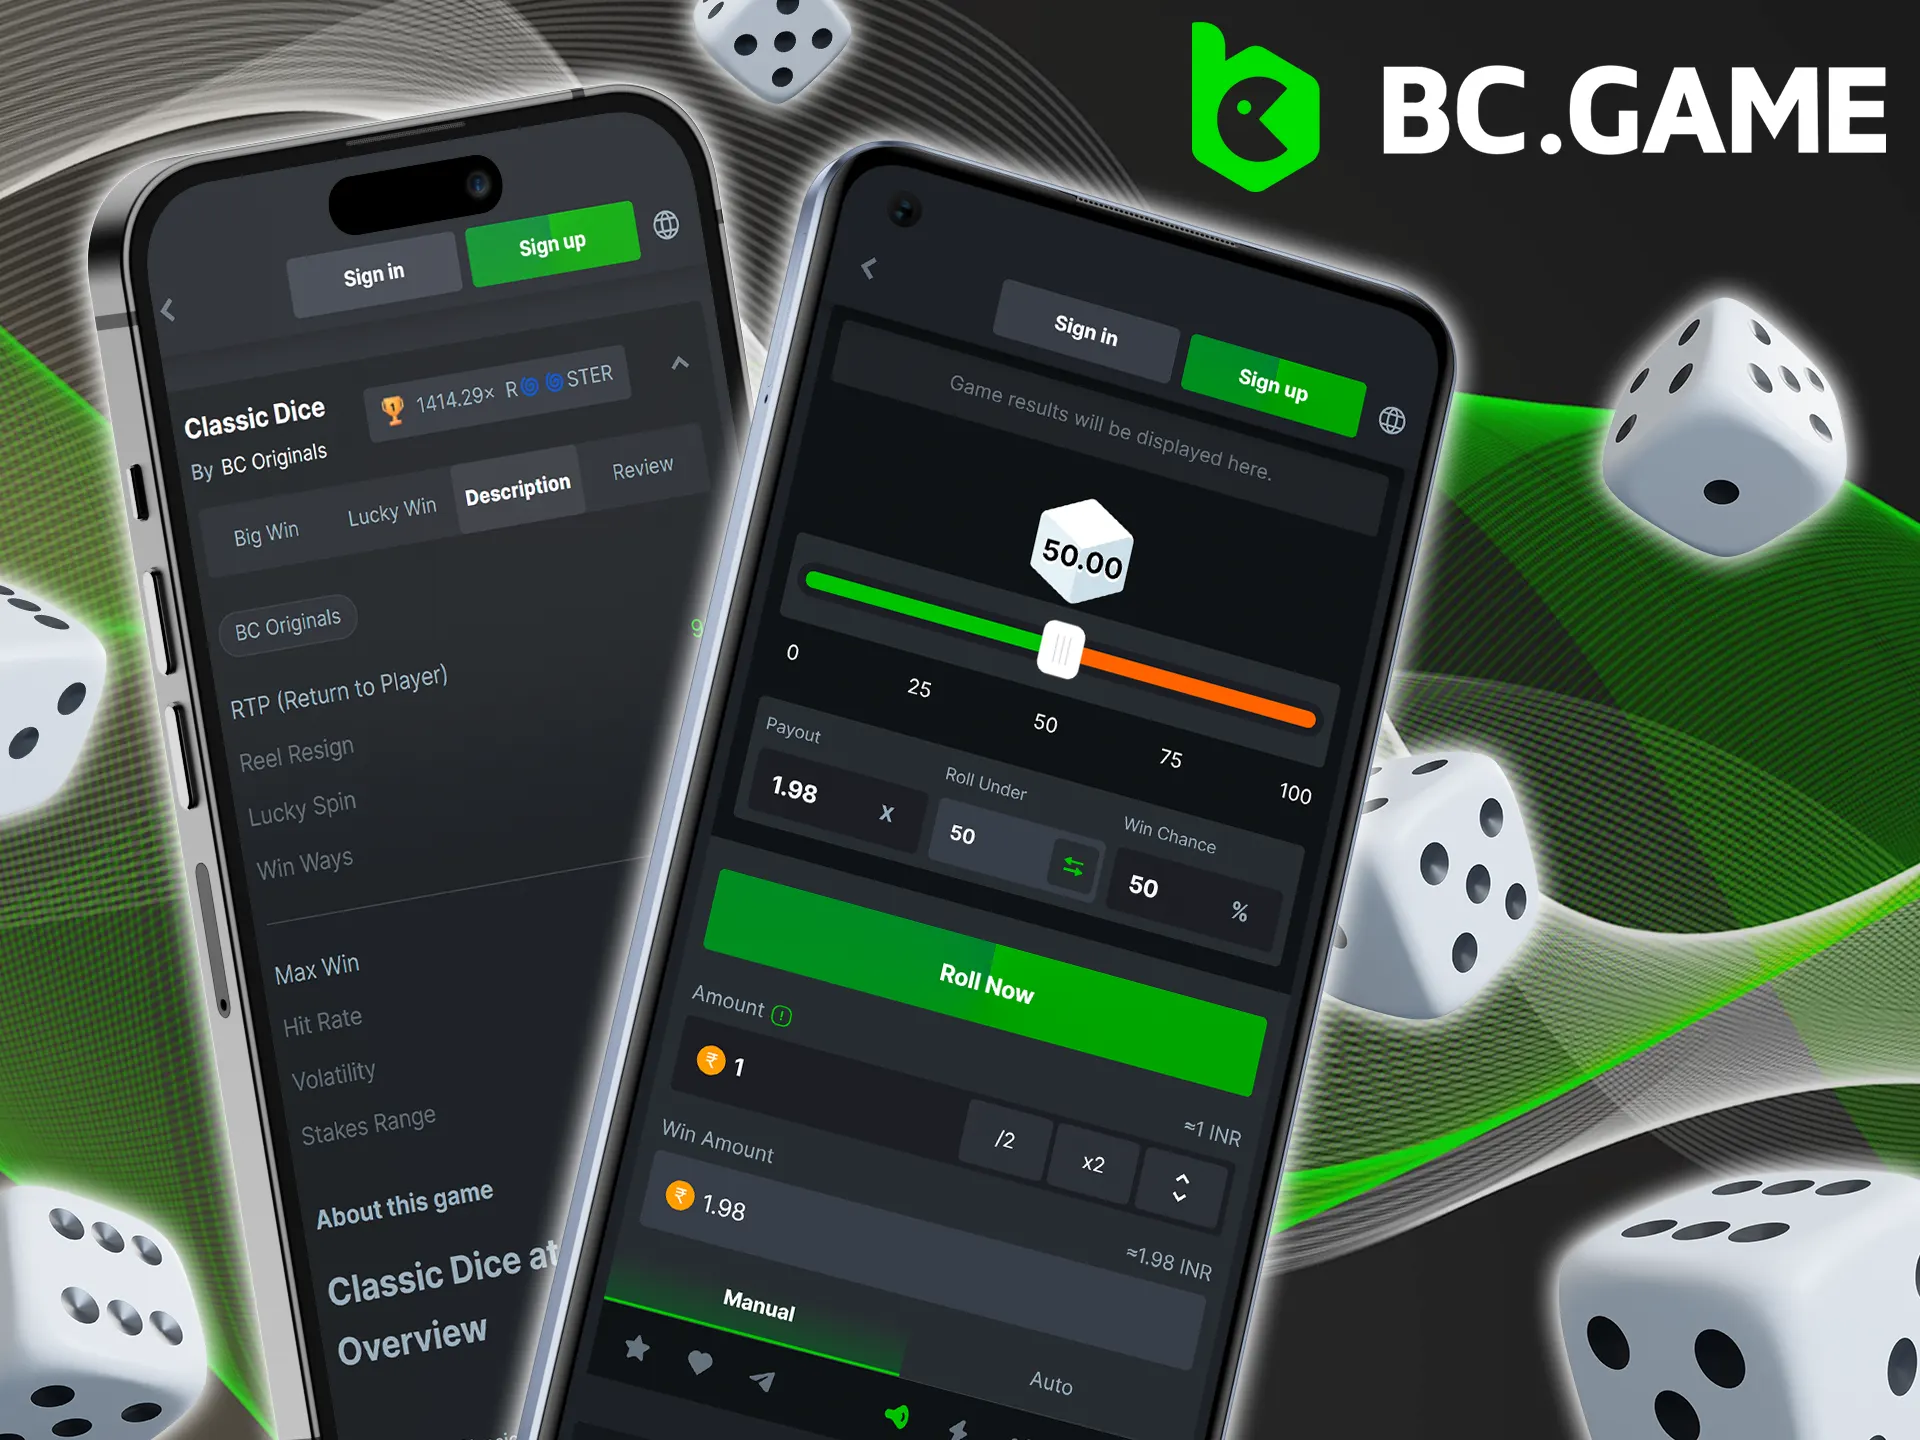 Download the BC Game app and play Classic Dice anytime.